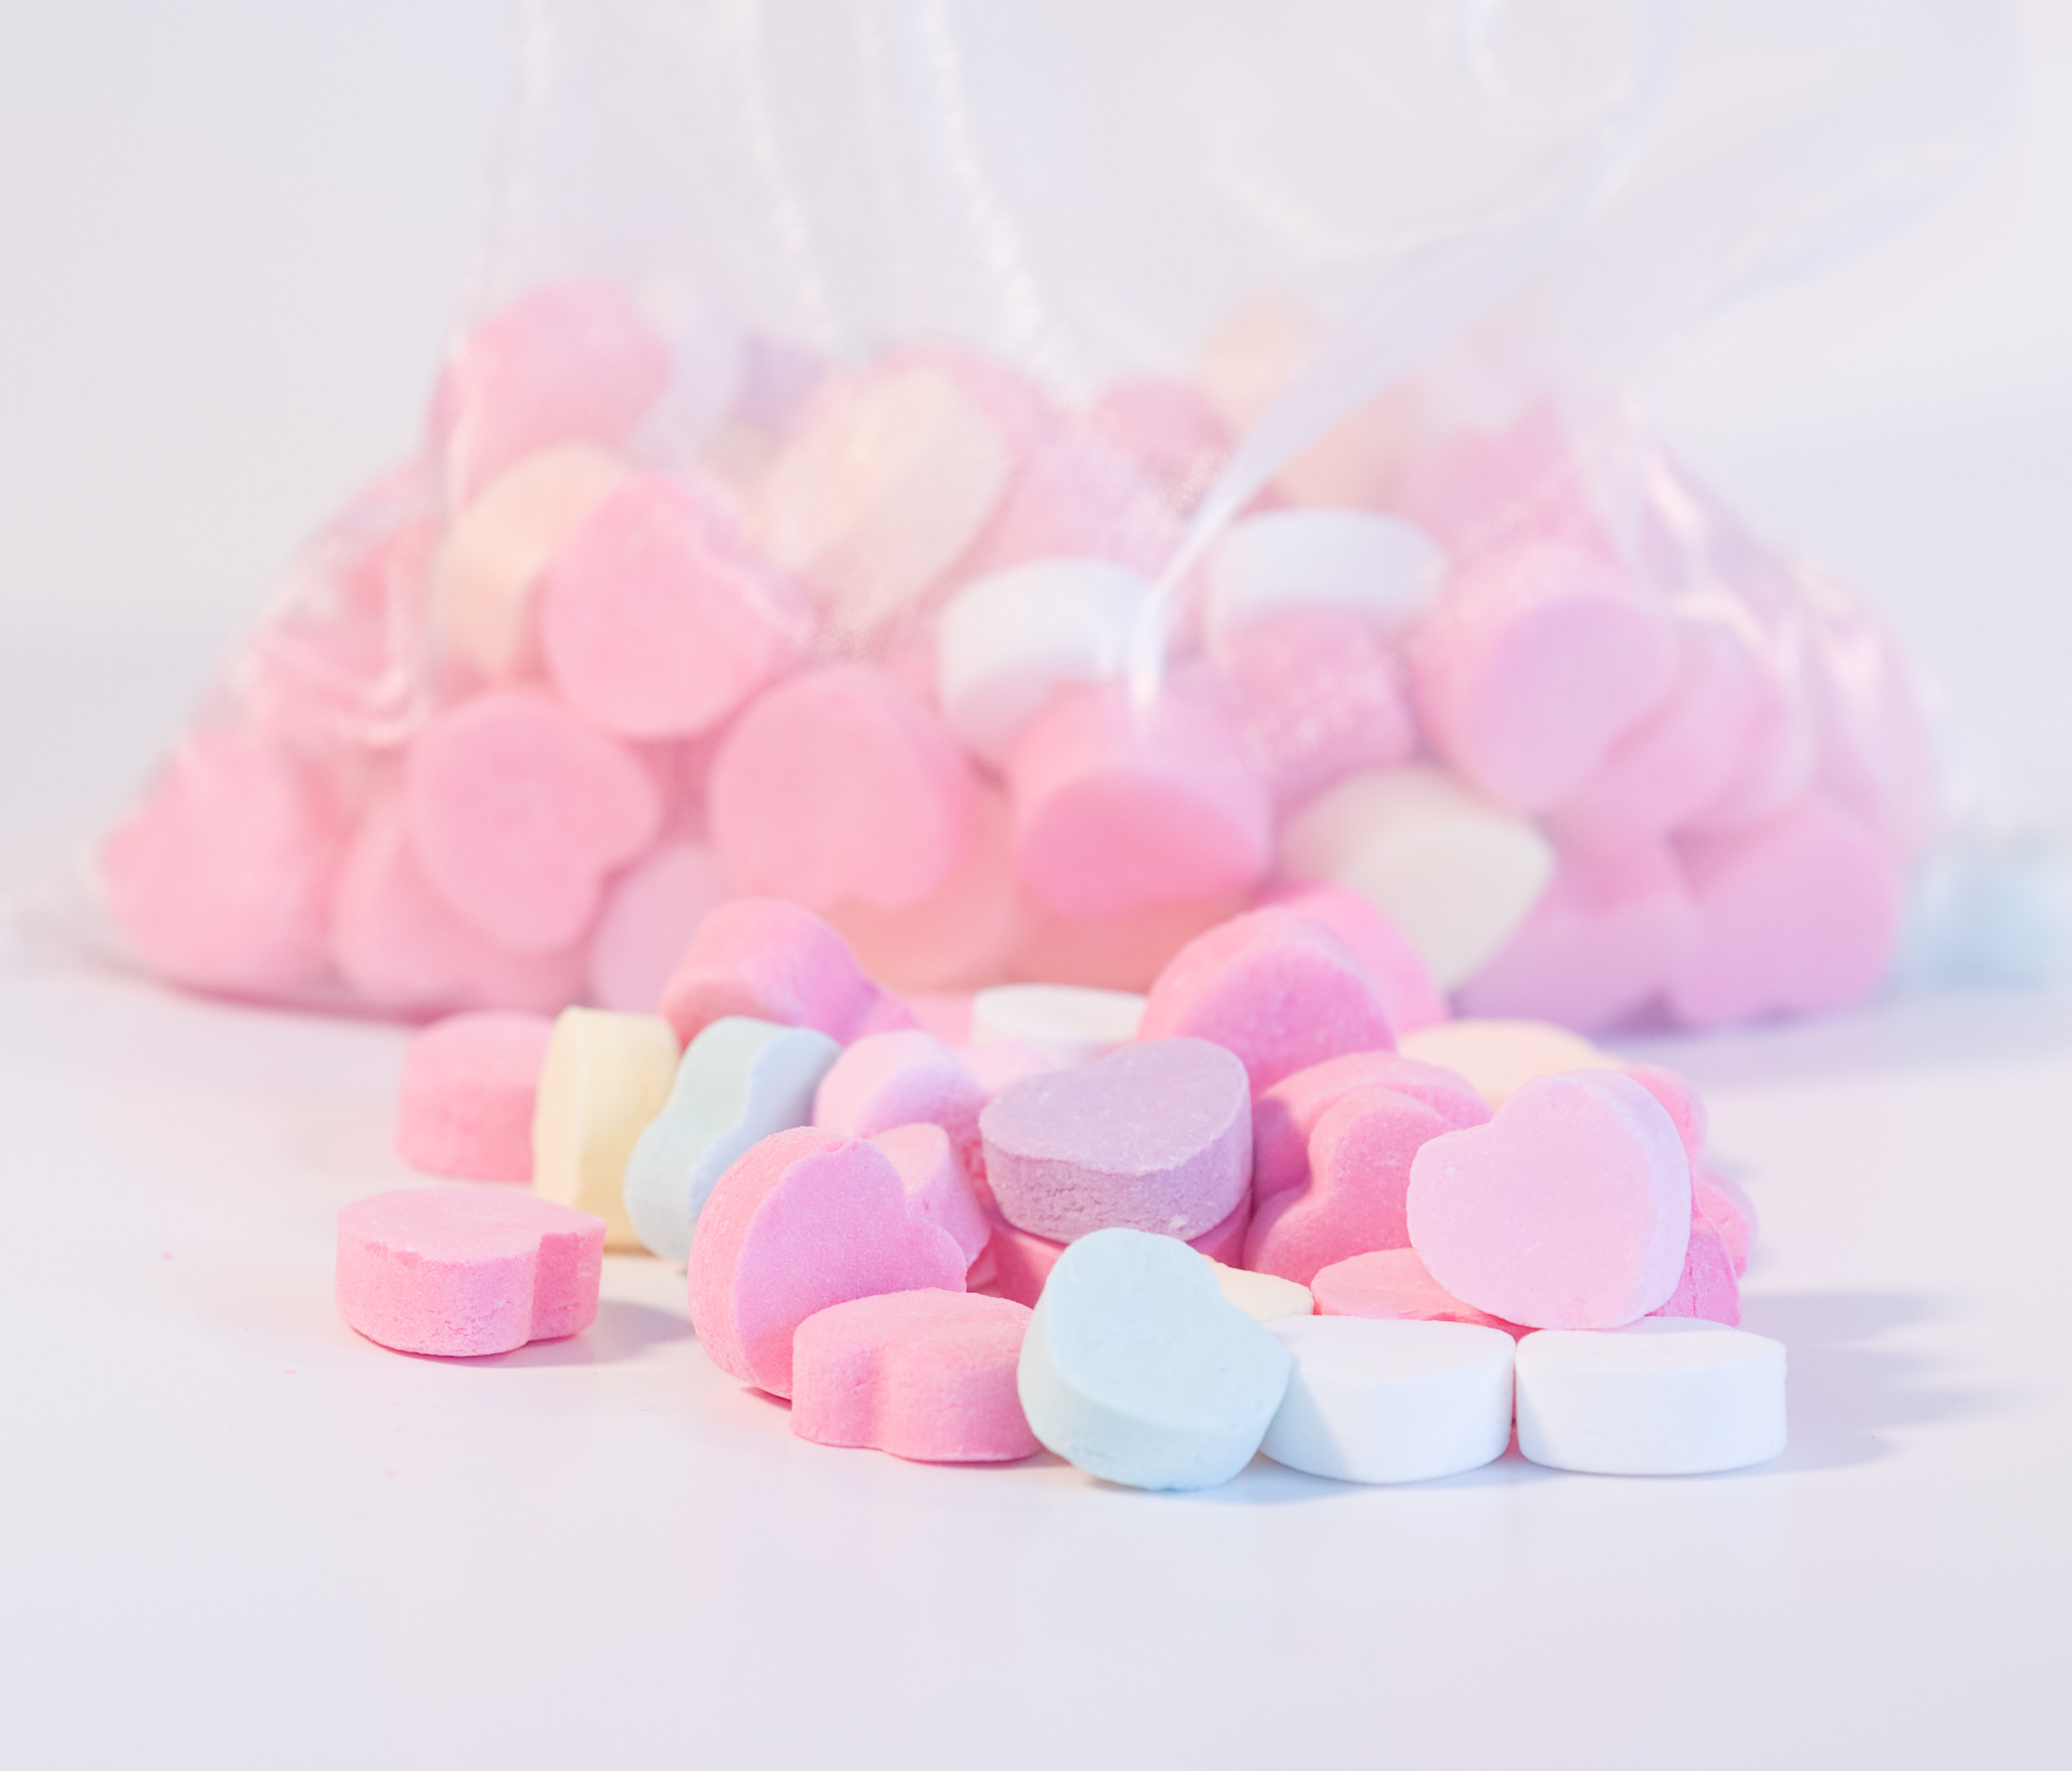 2476x2116 candy tumblr background - Google Search